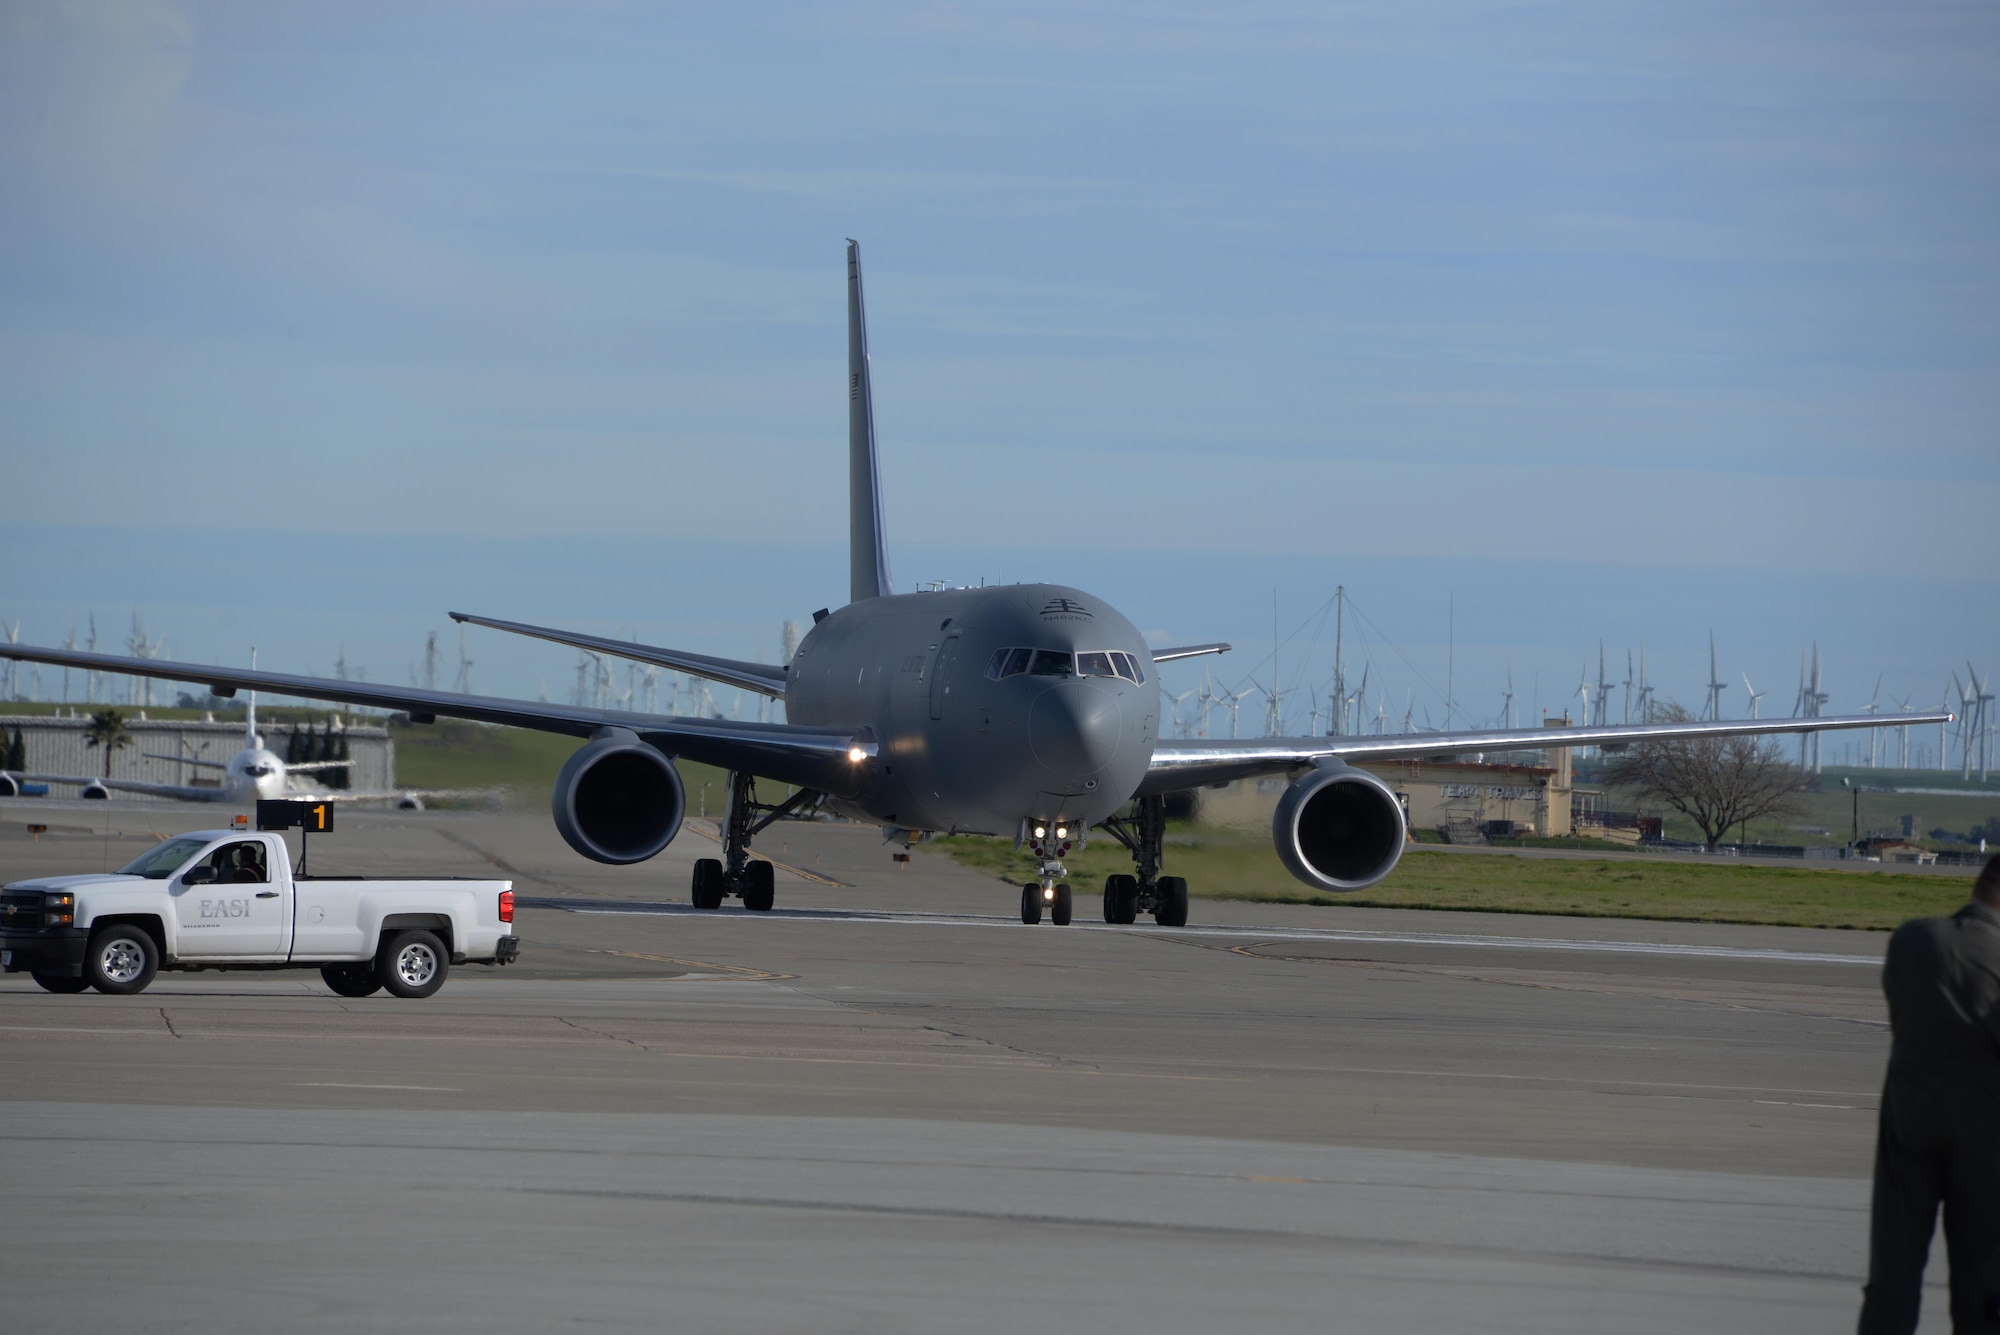 A KC-46A Pegasus taxis to its parking spot after landing at Travis Air Force Base, Calif., for the first time March 7, 2017. Travis was selected as a preferred location for the Air Force's newest refueling aircraft in January. The aircraft is scheduled to complete ground and air testing during its time at Travis. (U.S. Air Force photo by Tech. Sgt. James Hodgman) 